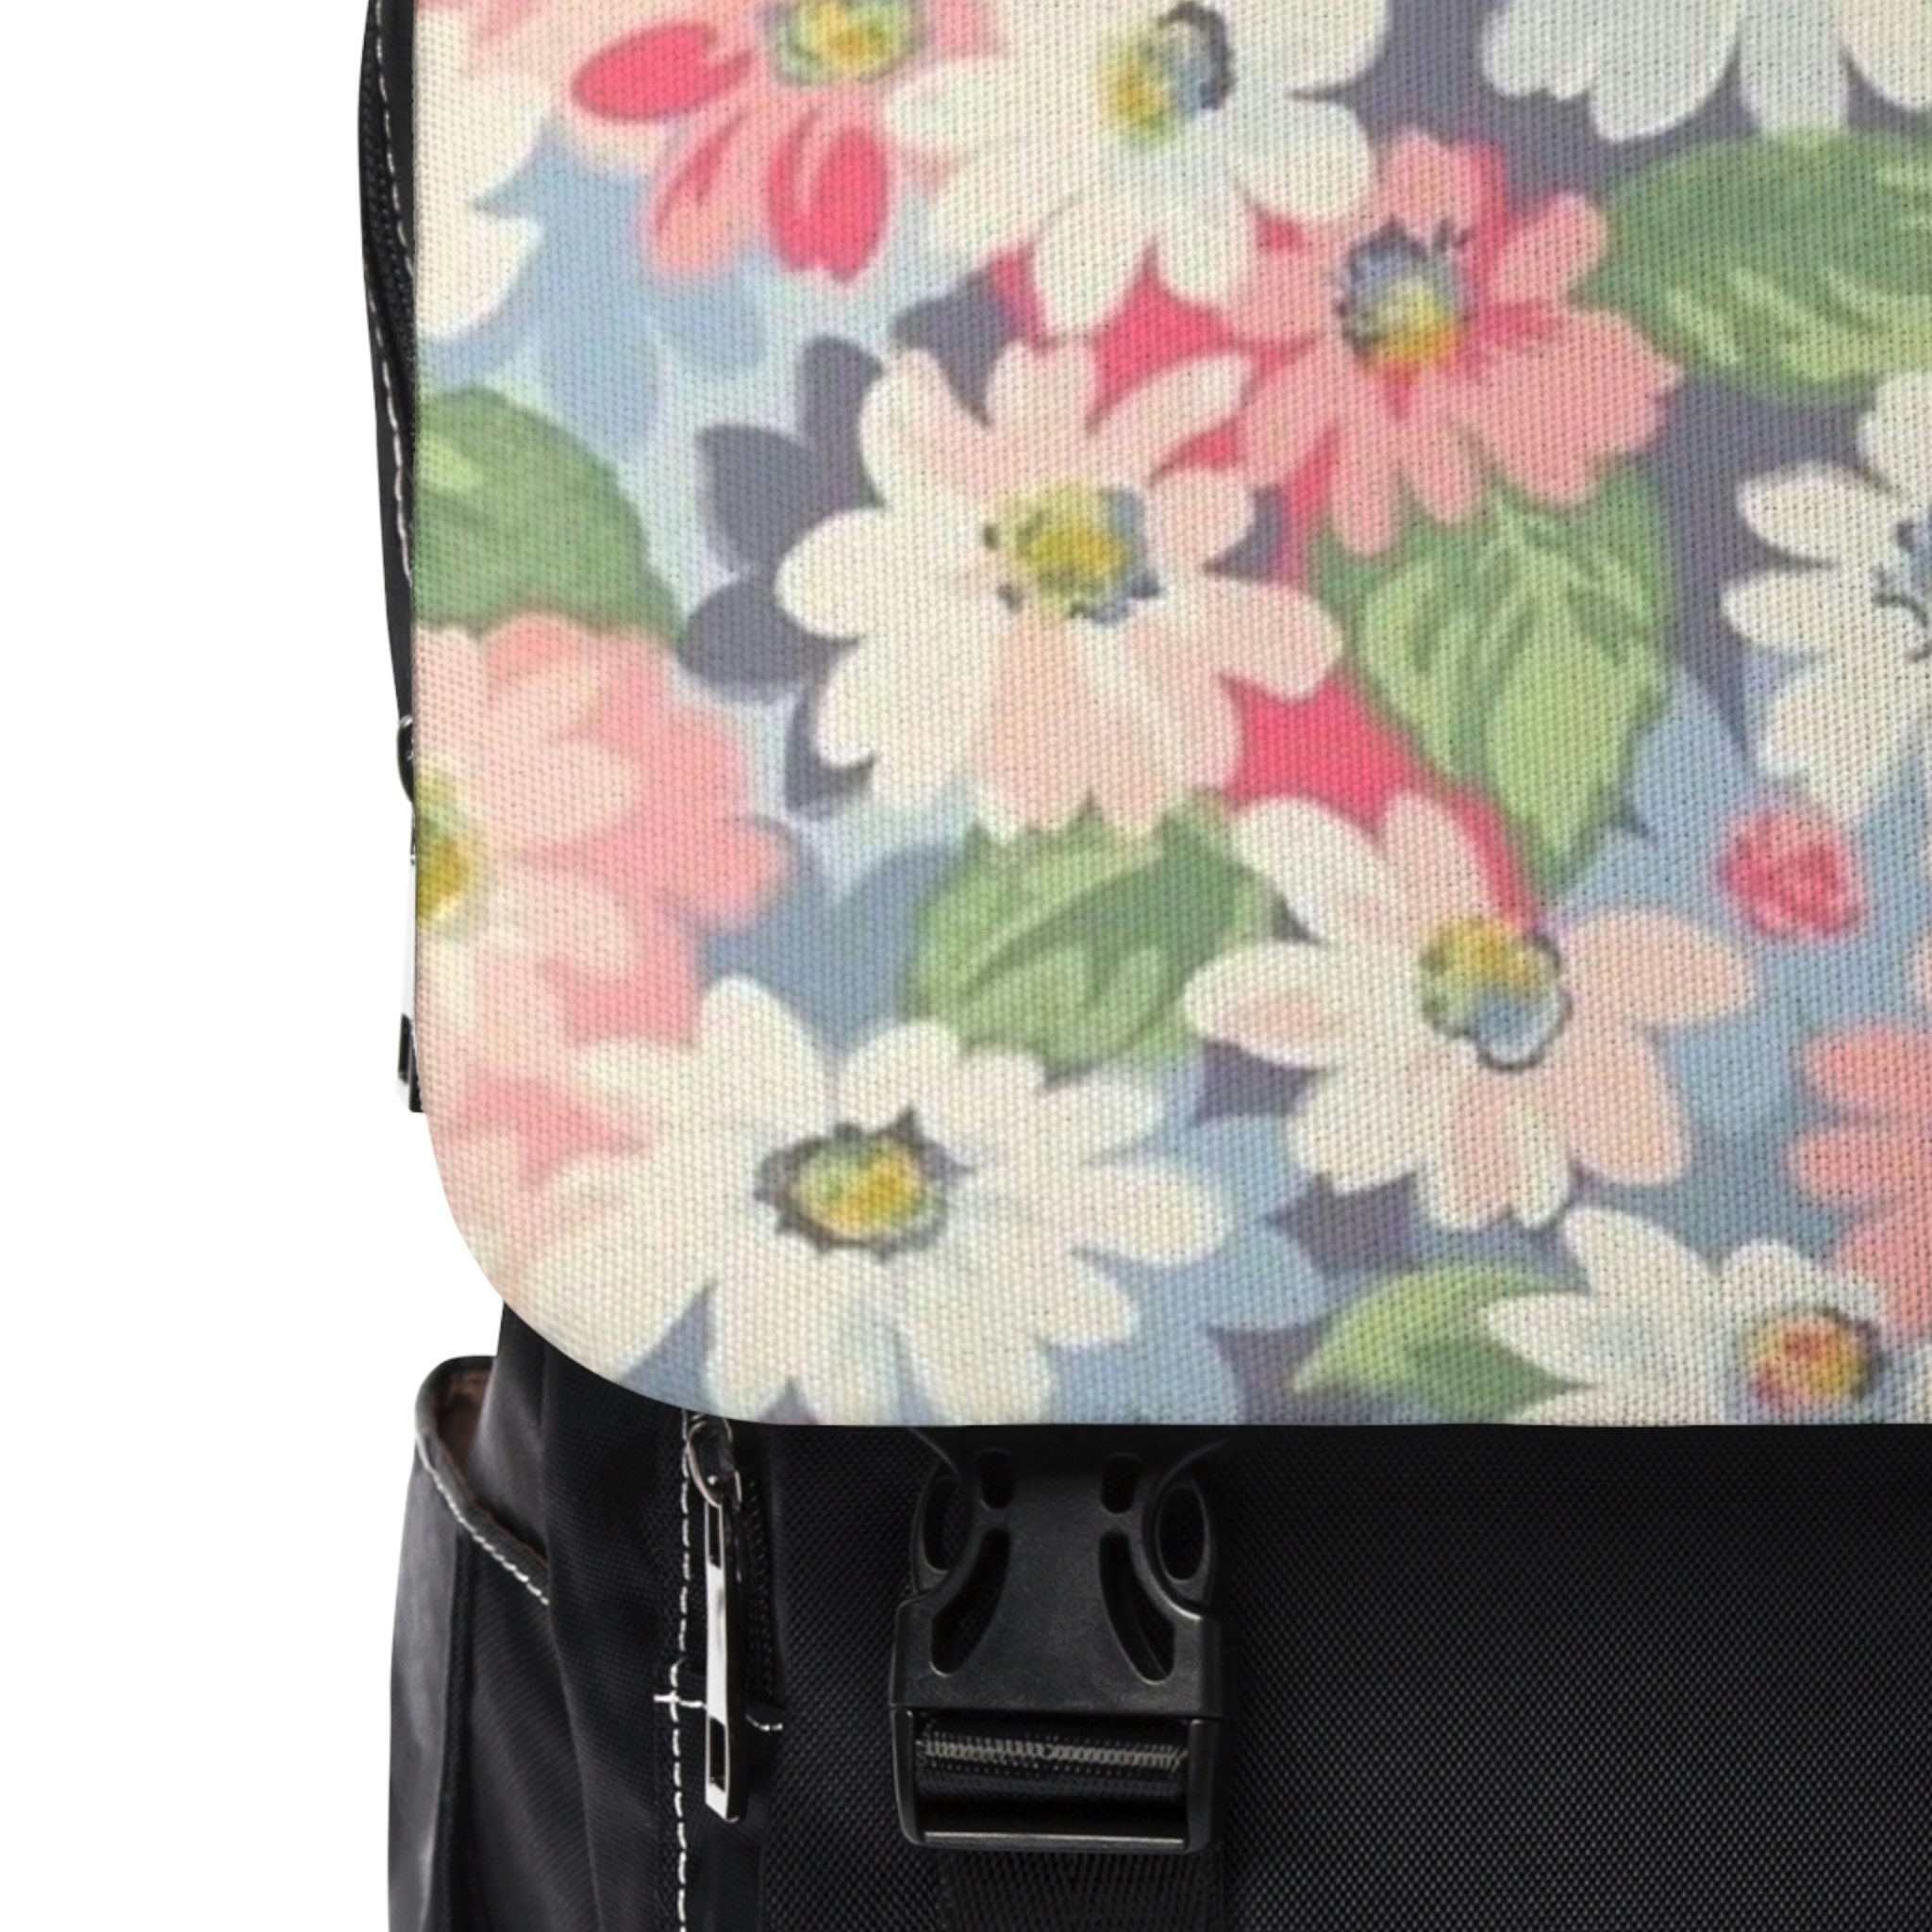 Unisex Casual Shoulder Backpack -  Daisies